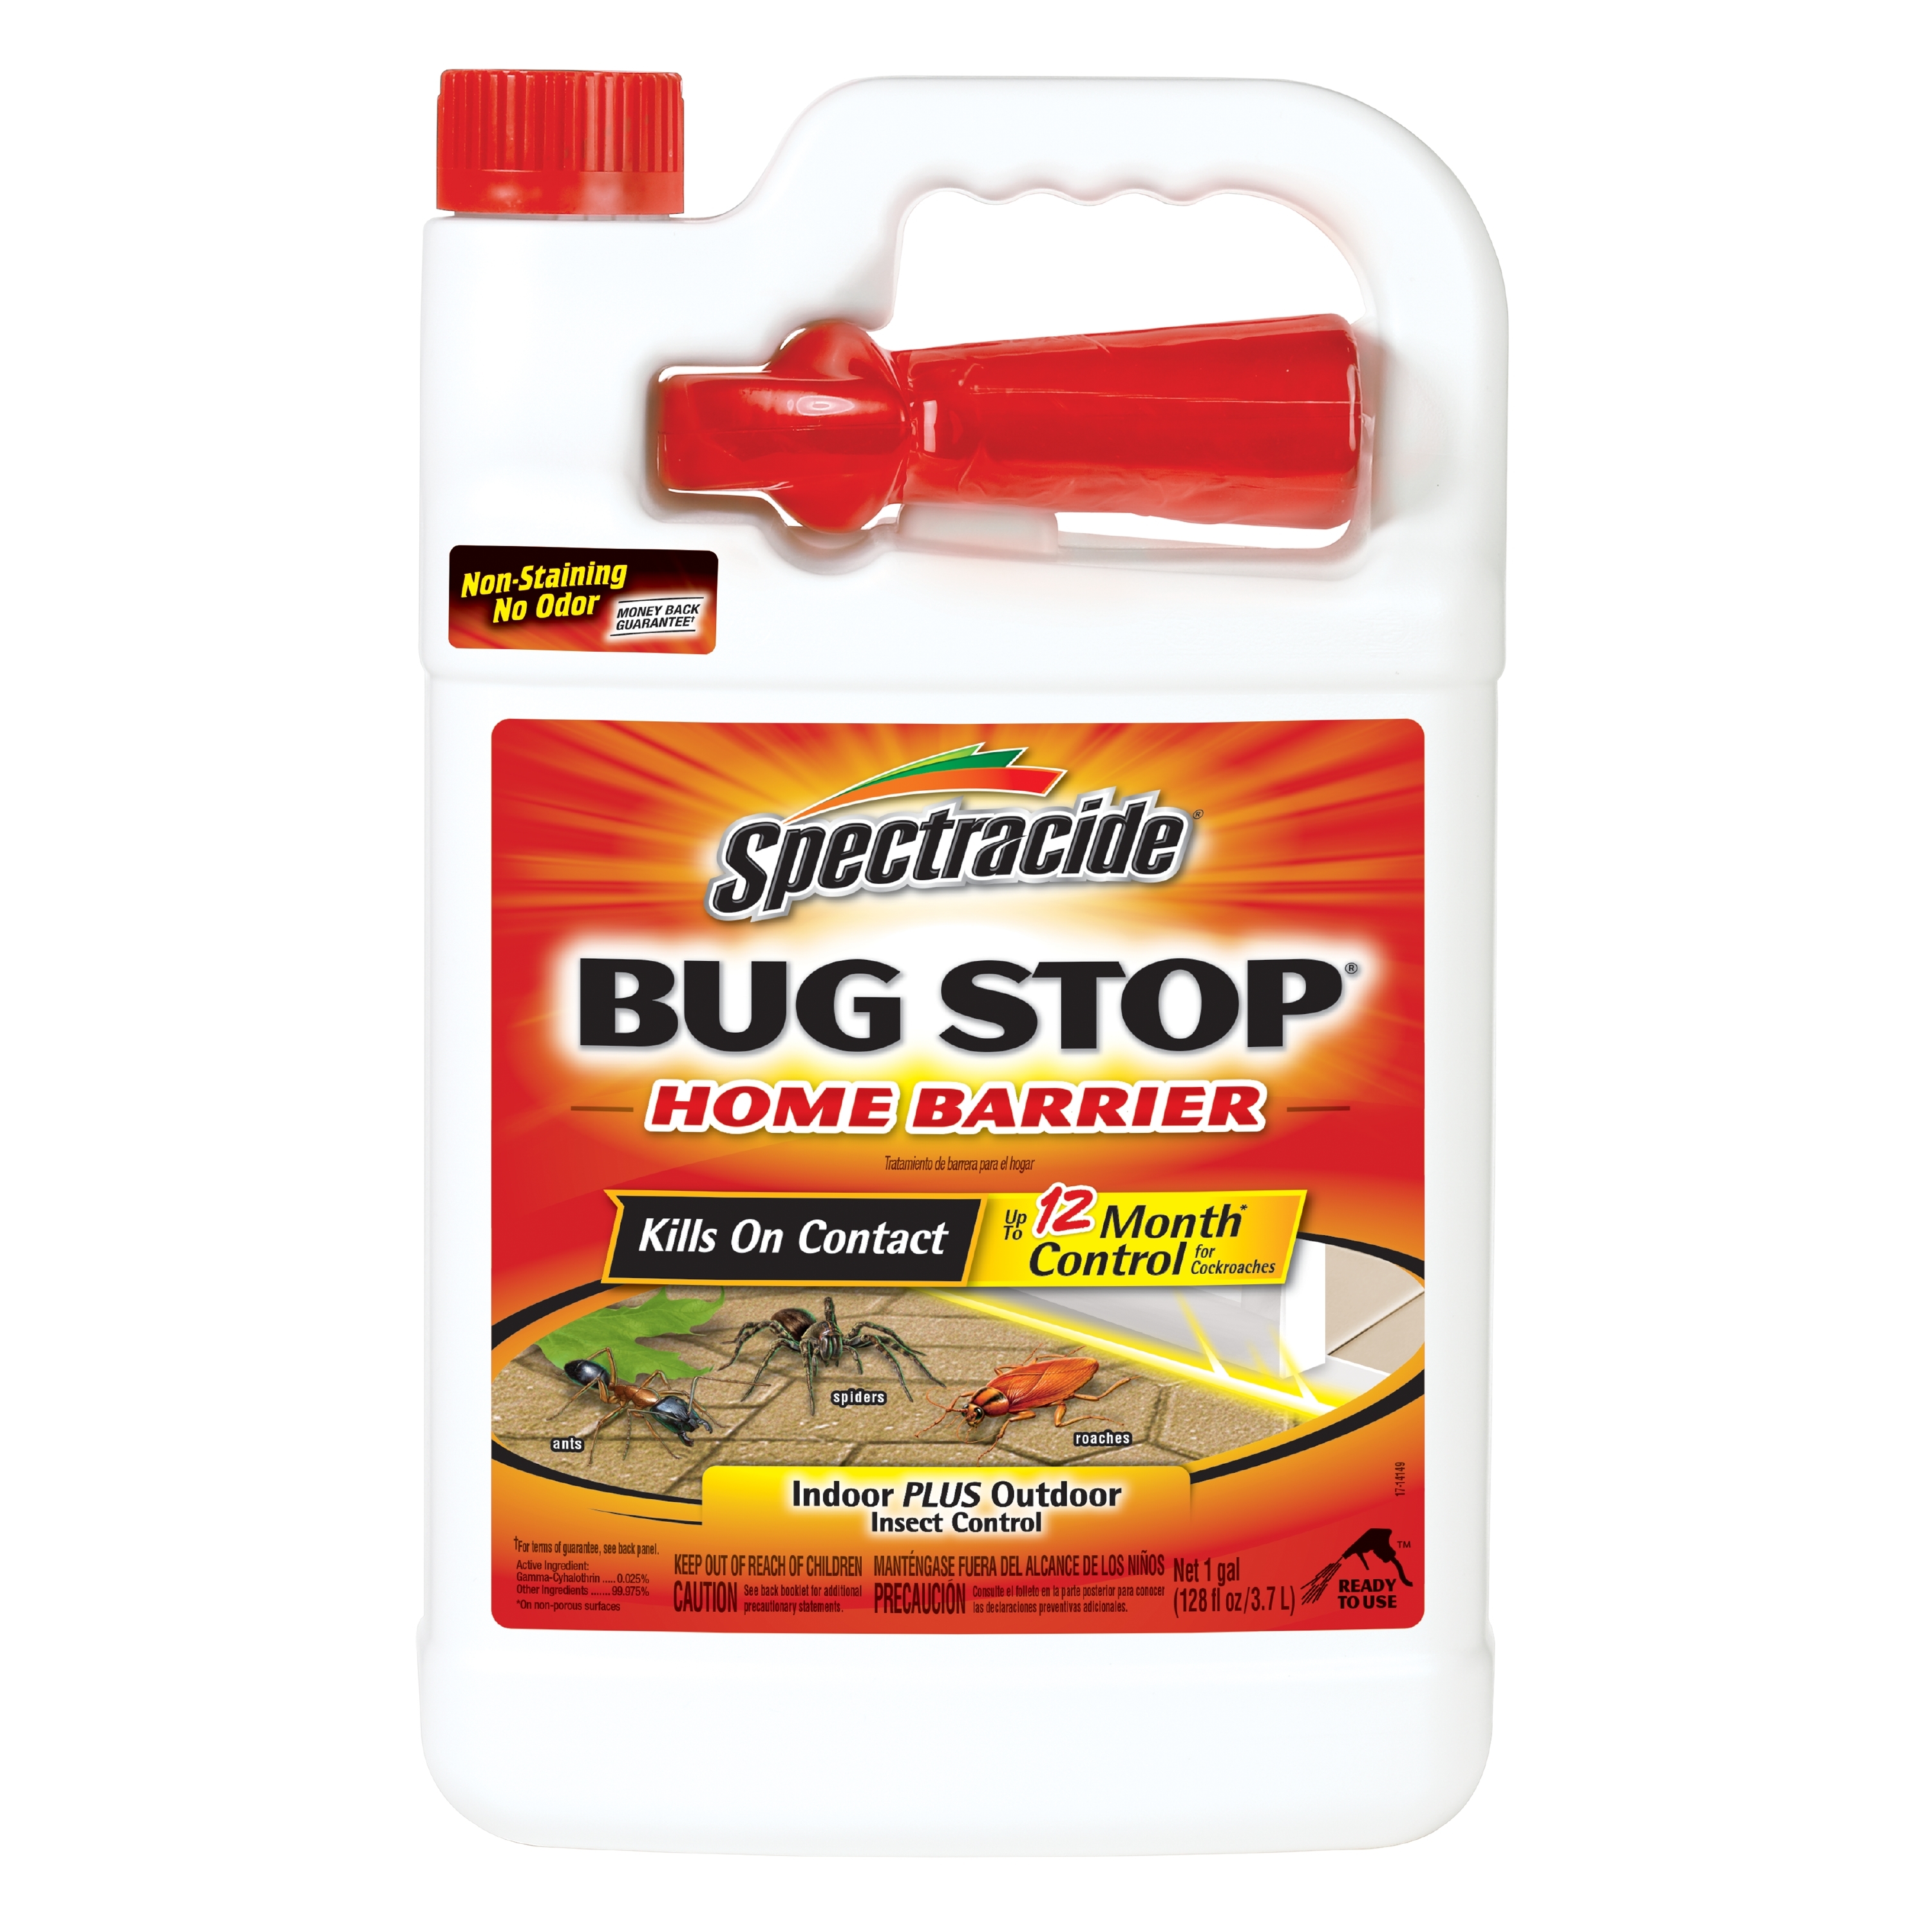 Spectracide Bug Stop Home Barrier Spray, Kills Ants, Roaches & Spiders Insect Control, 1 Gallon - image 1 of 11